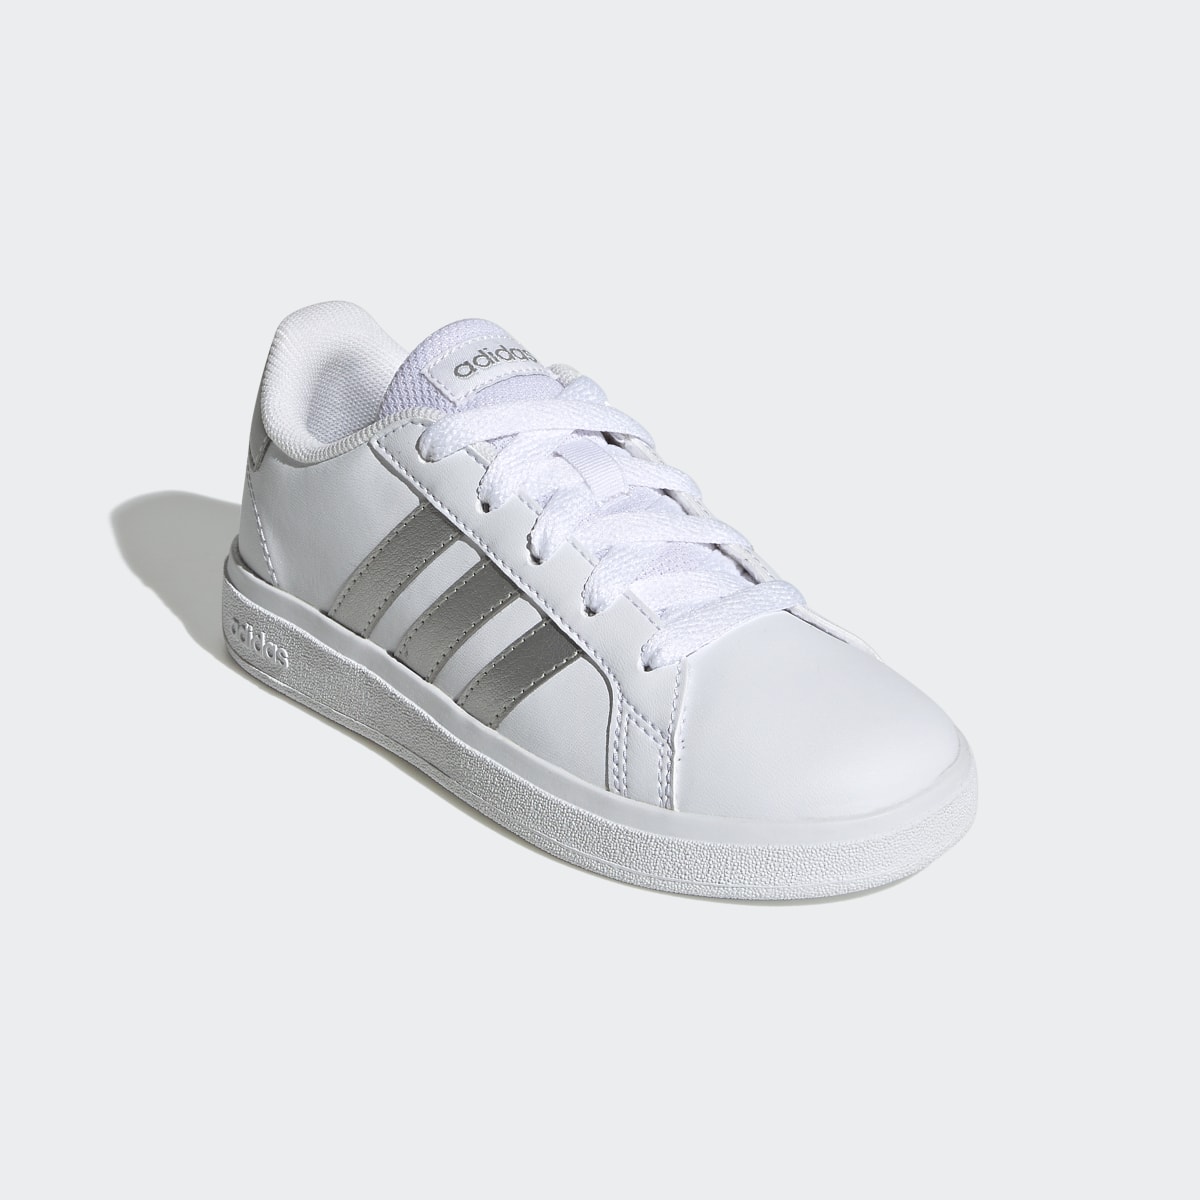 Adidas Grand Court Lifestyle Tennis Lace-Up Schuh. 5